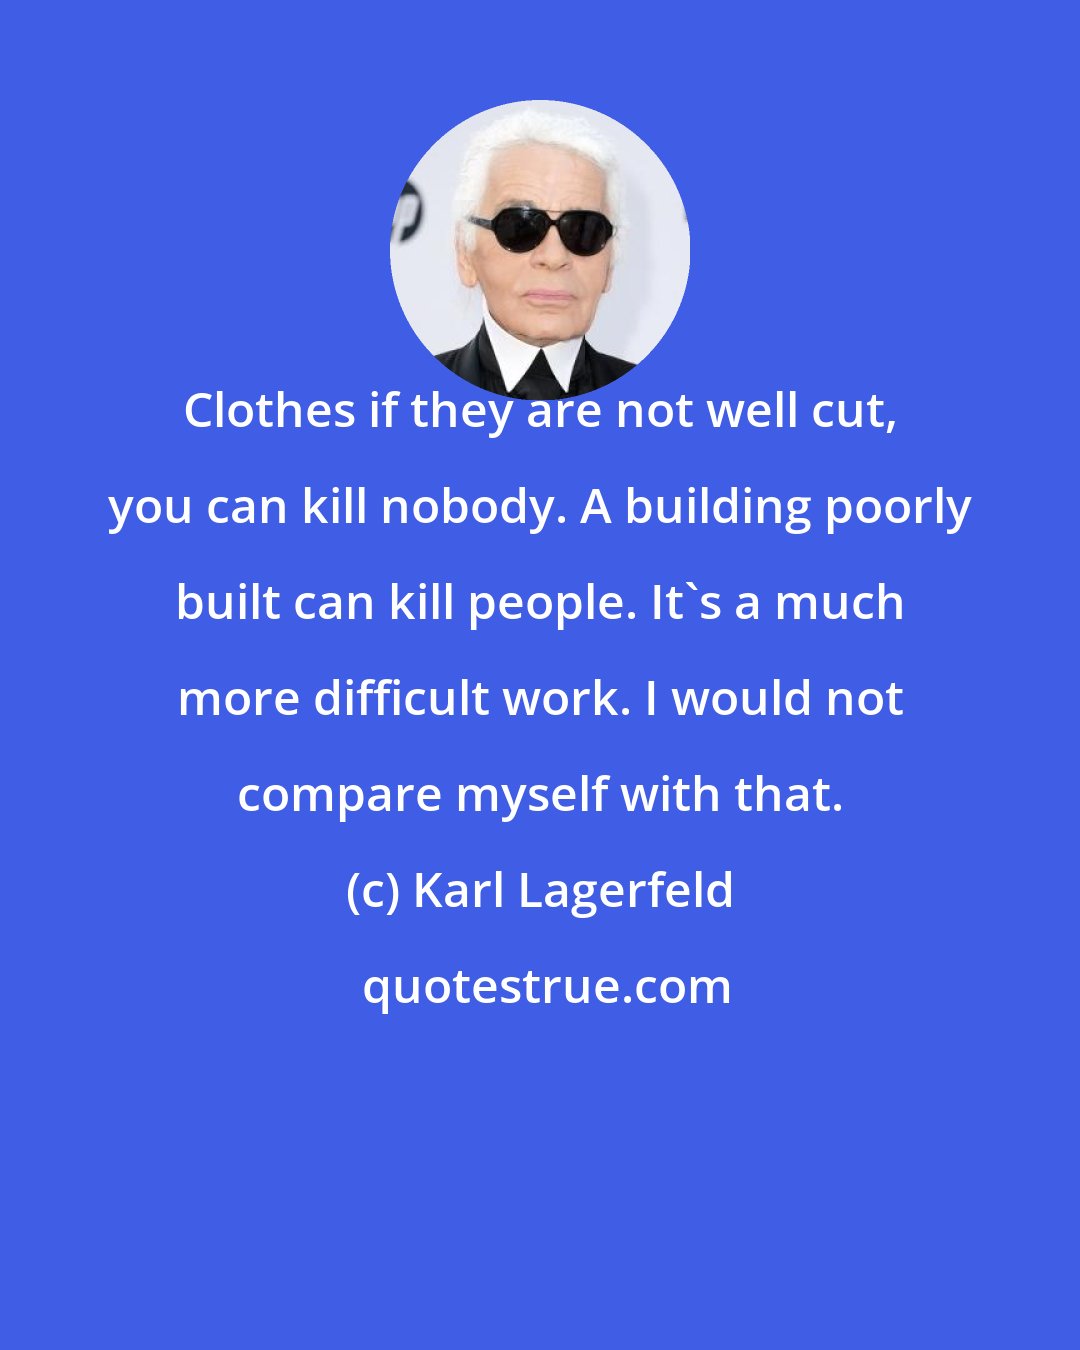 Karl Lagerfeld: Clothes if they are not well cut, you can kill nobody. A building poorly built can kill people. It's a much more difficult work. I would not compare myself with that.